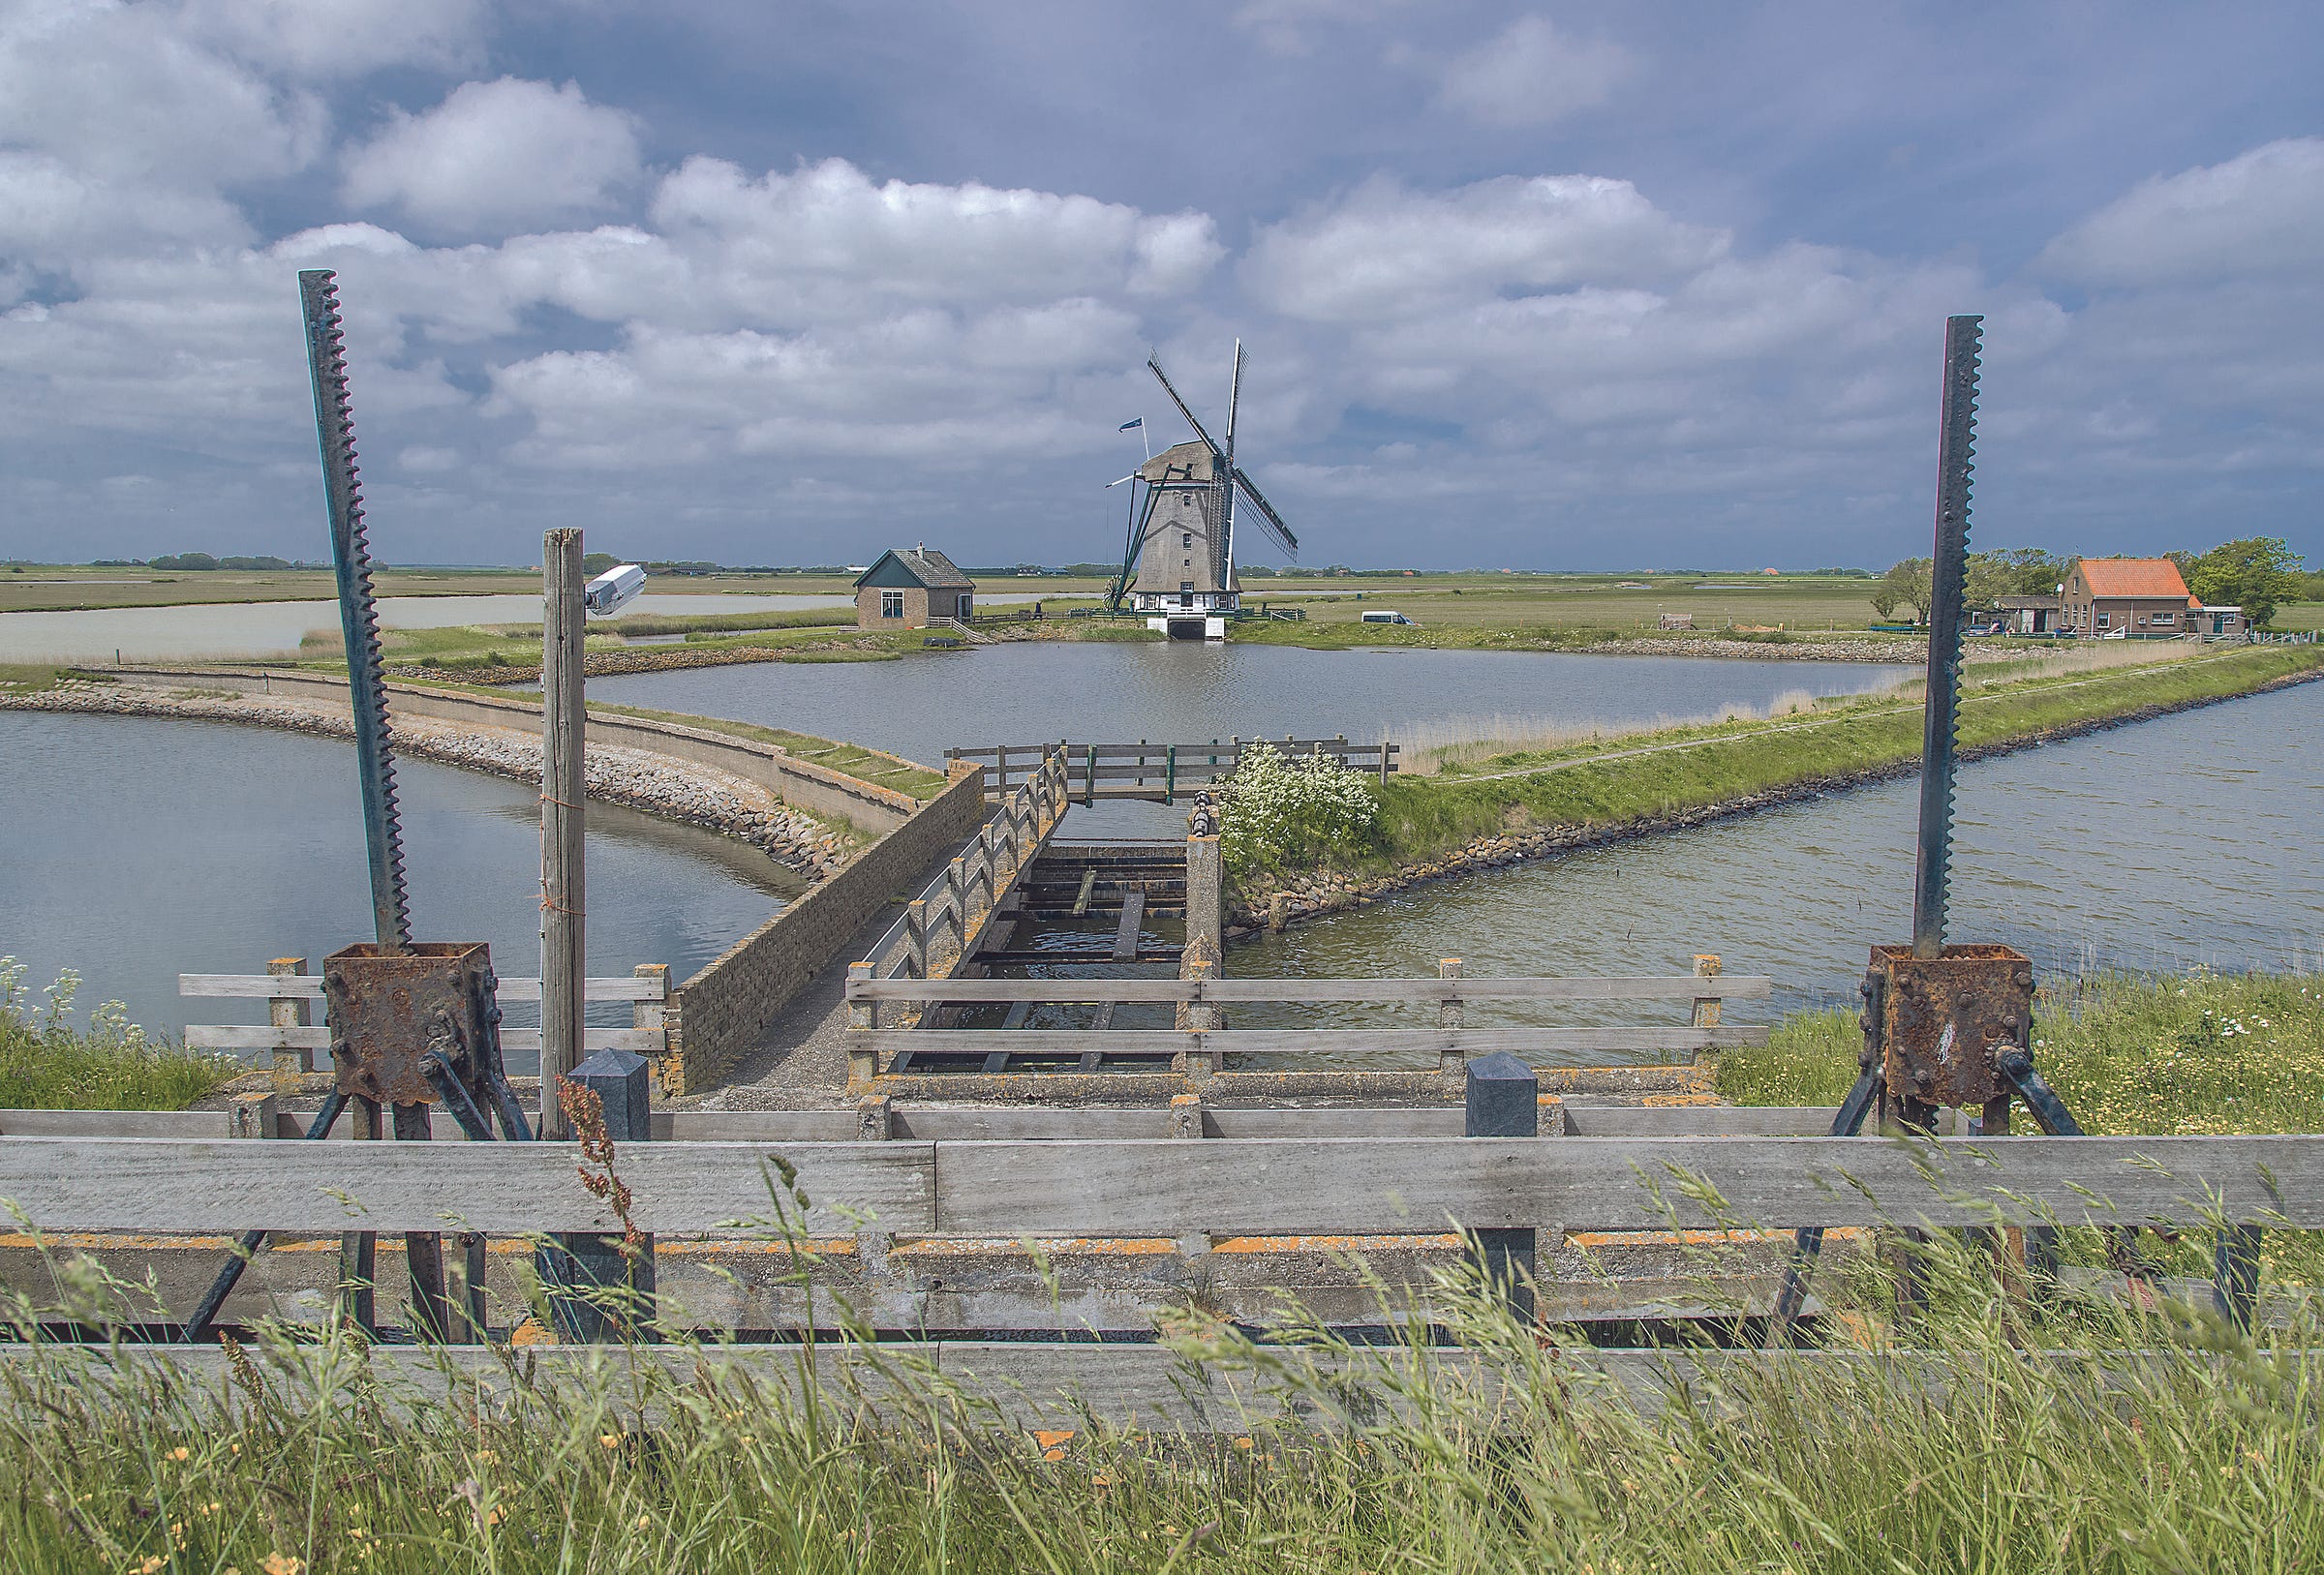 The Dutch Are Building a Barricade Against Climate Change